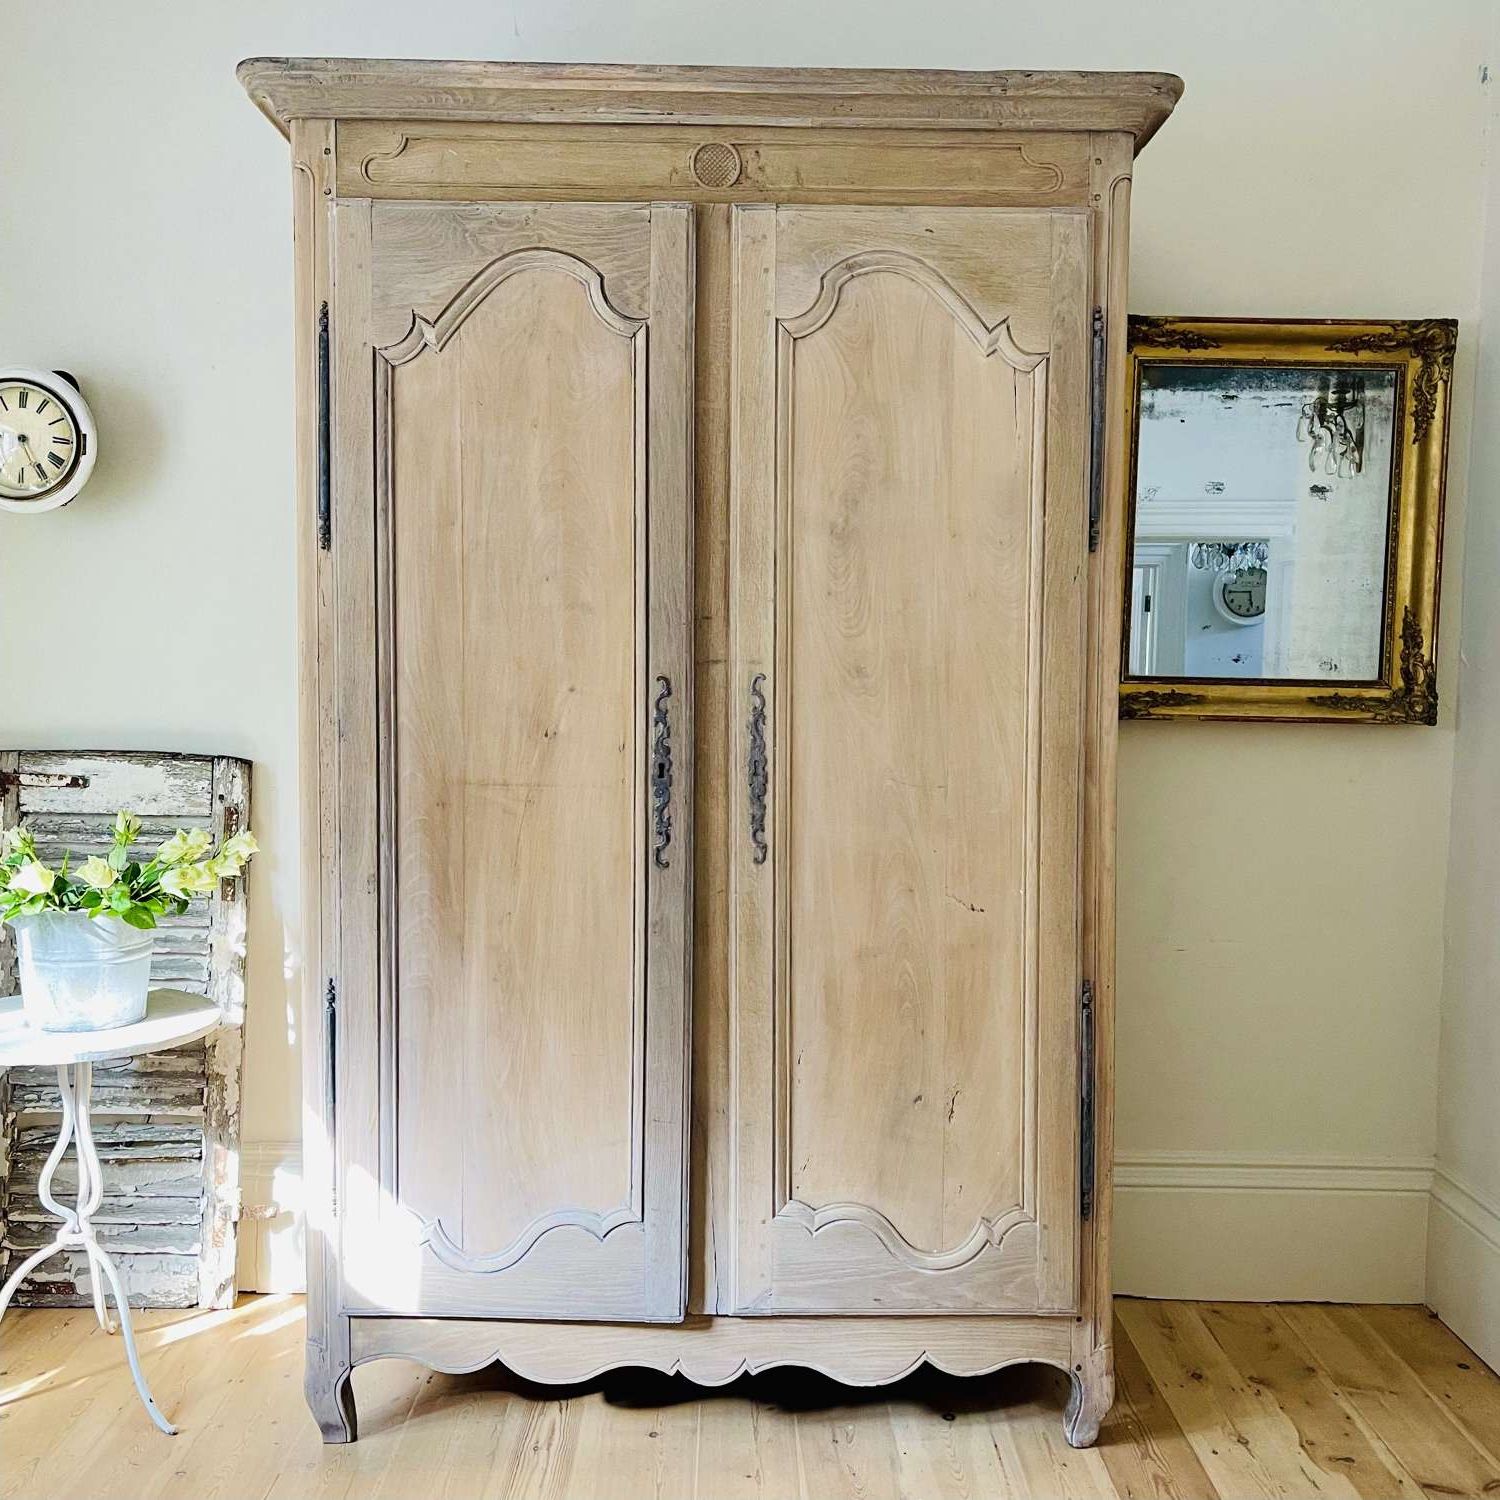 19th Century French Oak Armoire Wardrobe With Hanging Rail Throughout French Style Armoires Wardrobes (View 11 of 20)